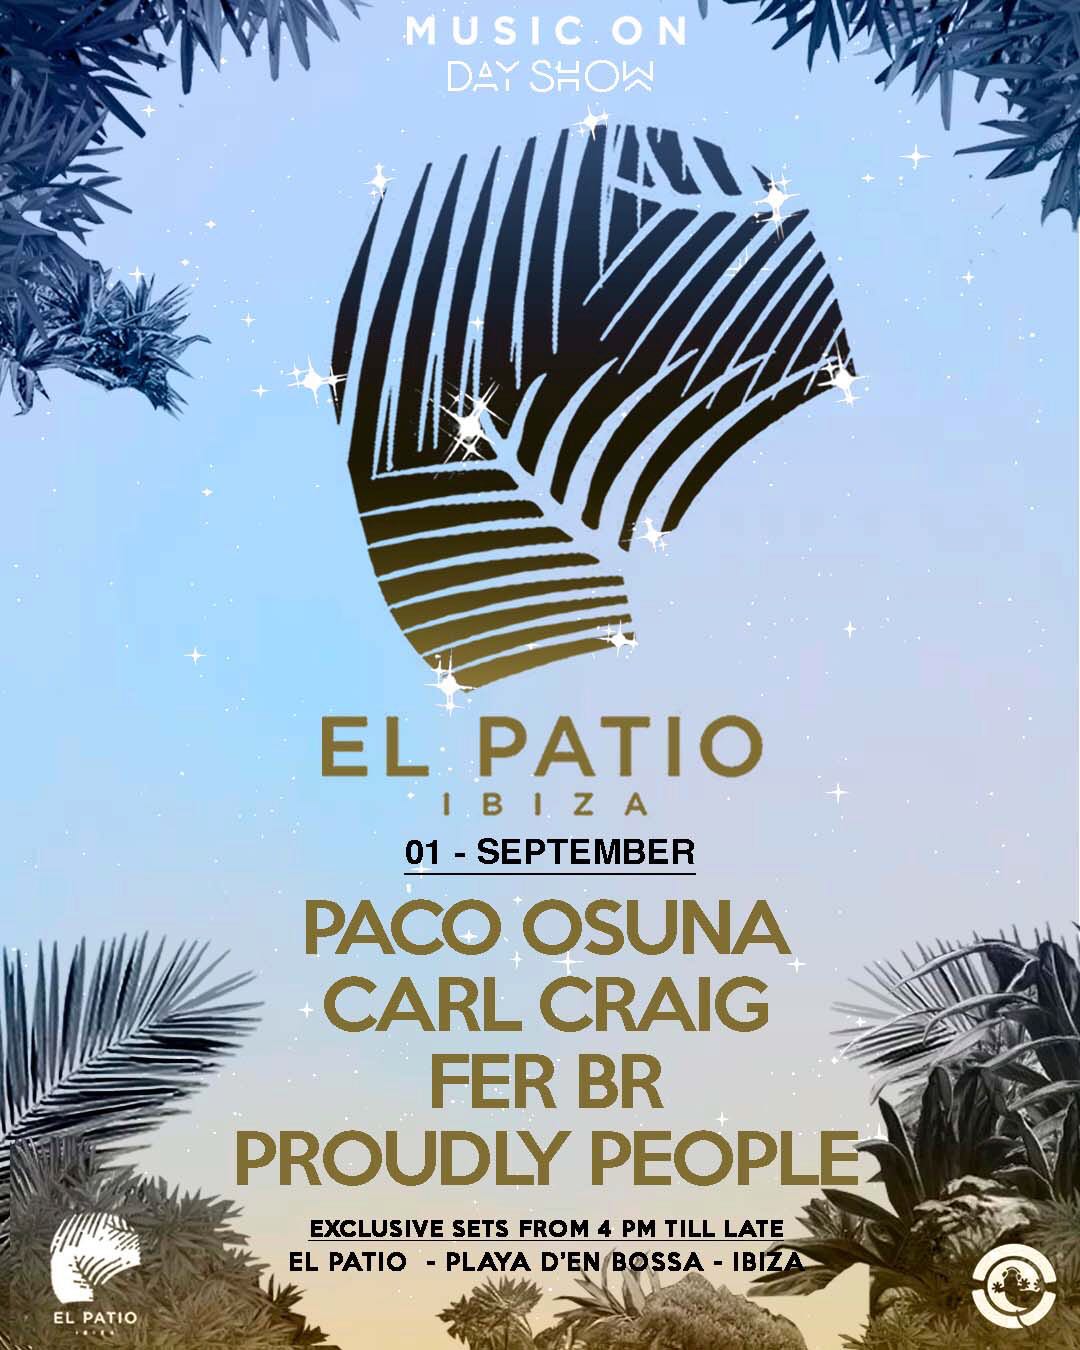 Carl Craig, Paco Osuna, more play Marco Carola’s Music On Day Show this weekend